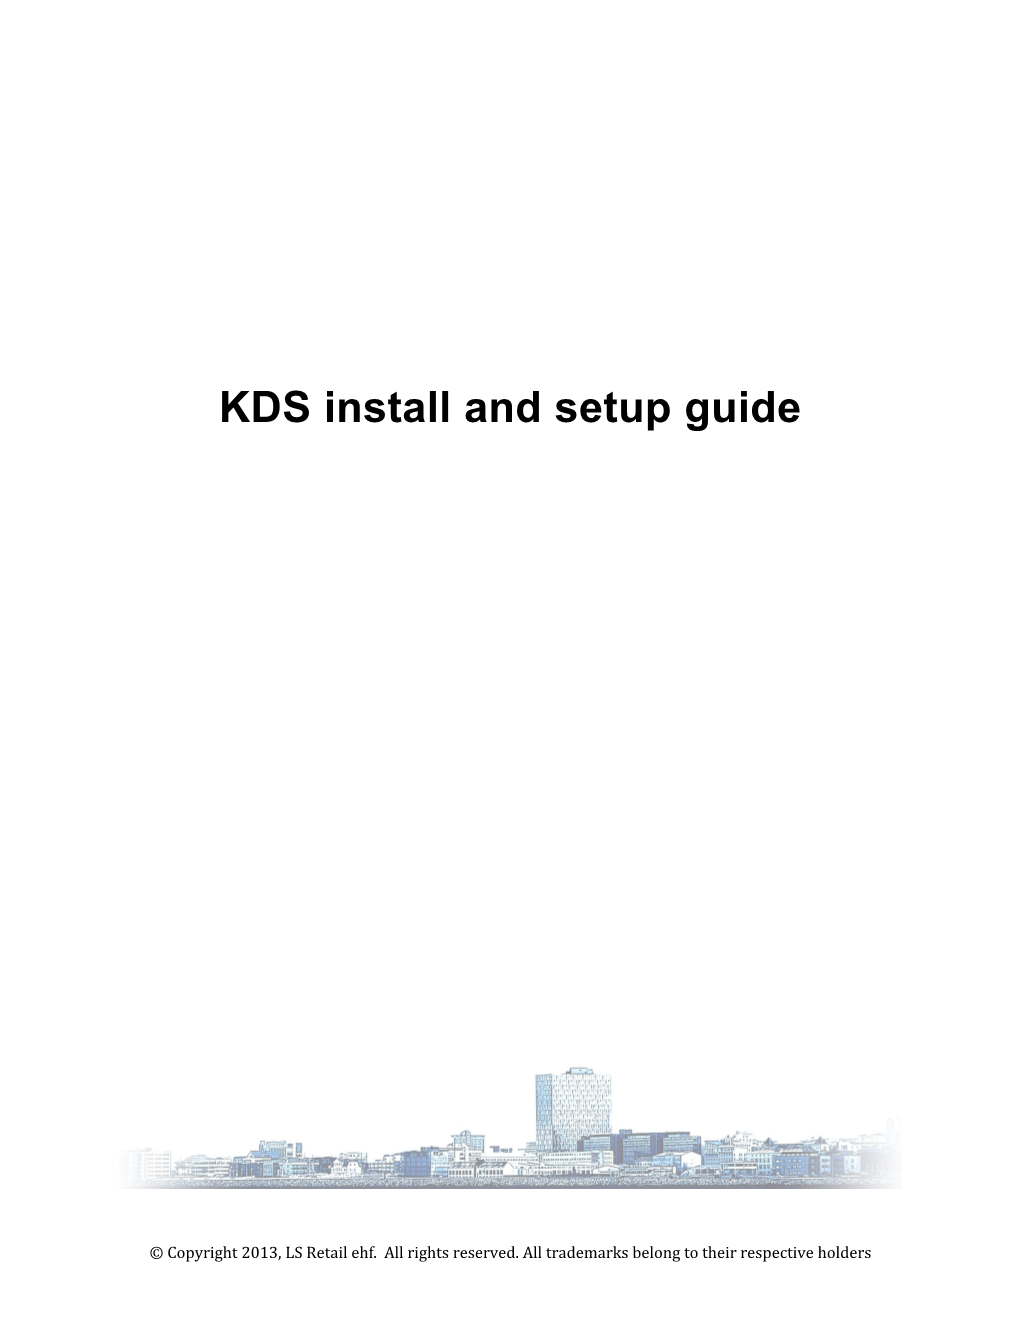 LS One Kitchen Monitor Install and Setup Guide.Dotx